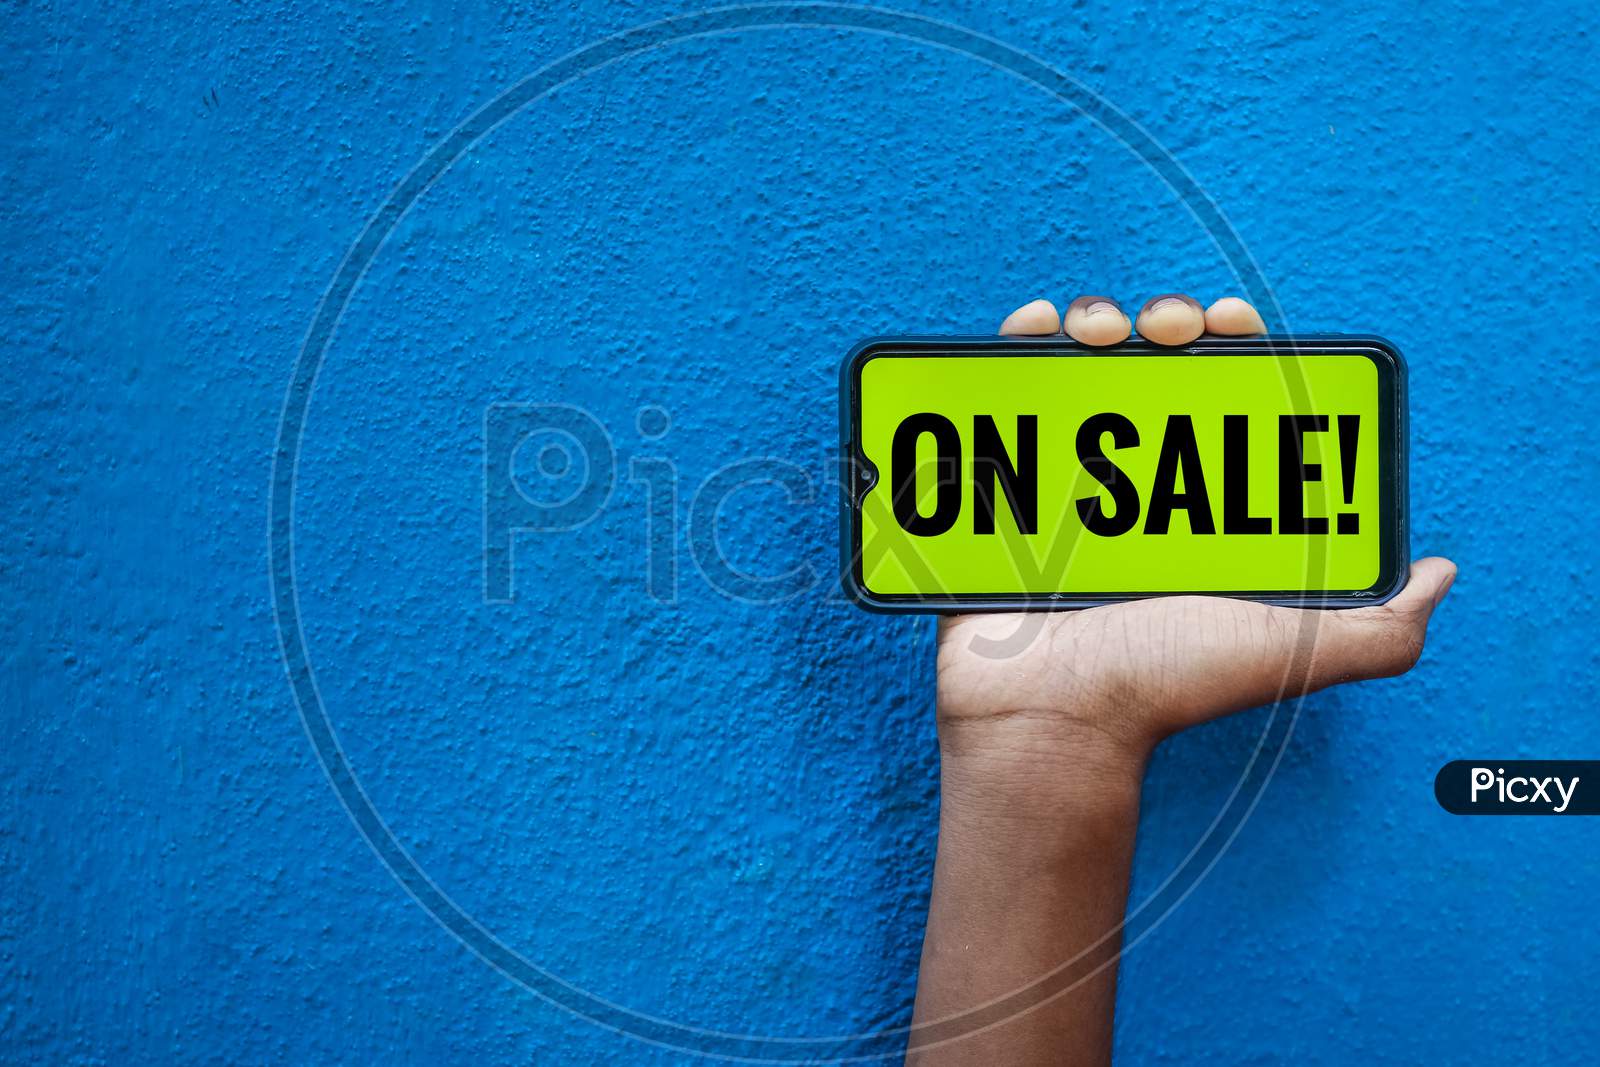 On Sale Wording On Smart Phone Screen Isolated On Blue Background With Copy Space For Text. Person Holding Mobile On His Hand And Showing Front Of The Screen Word On Sale